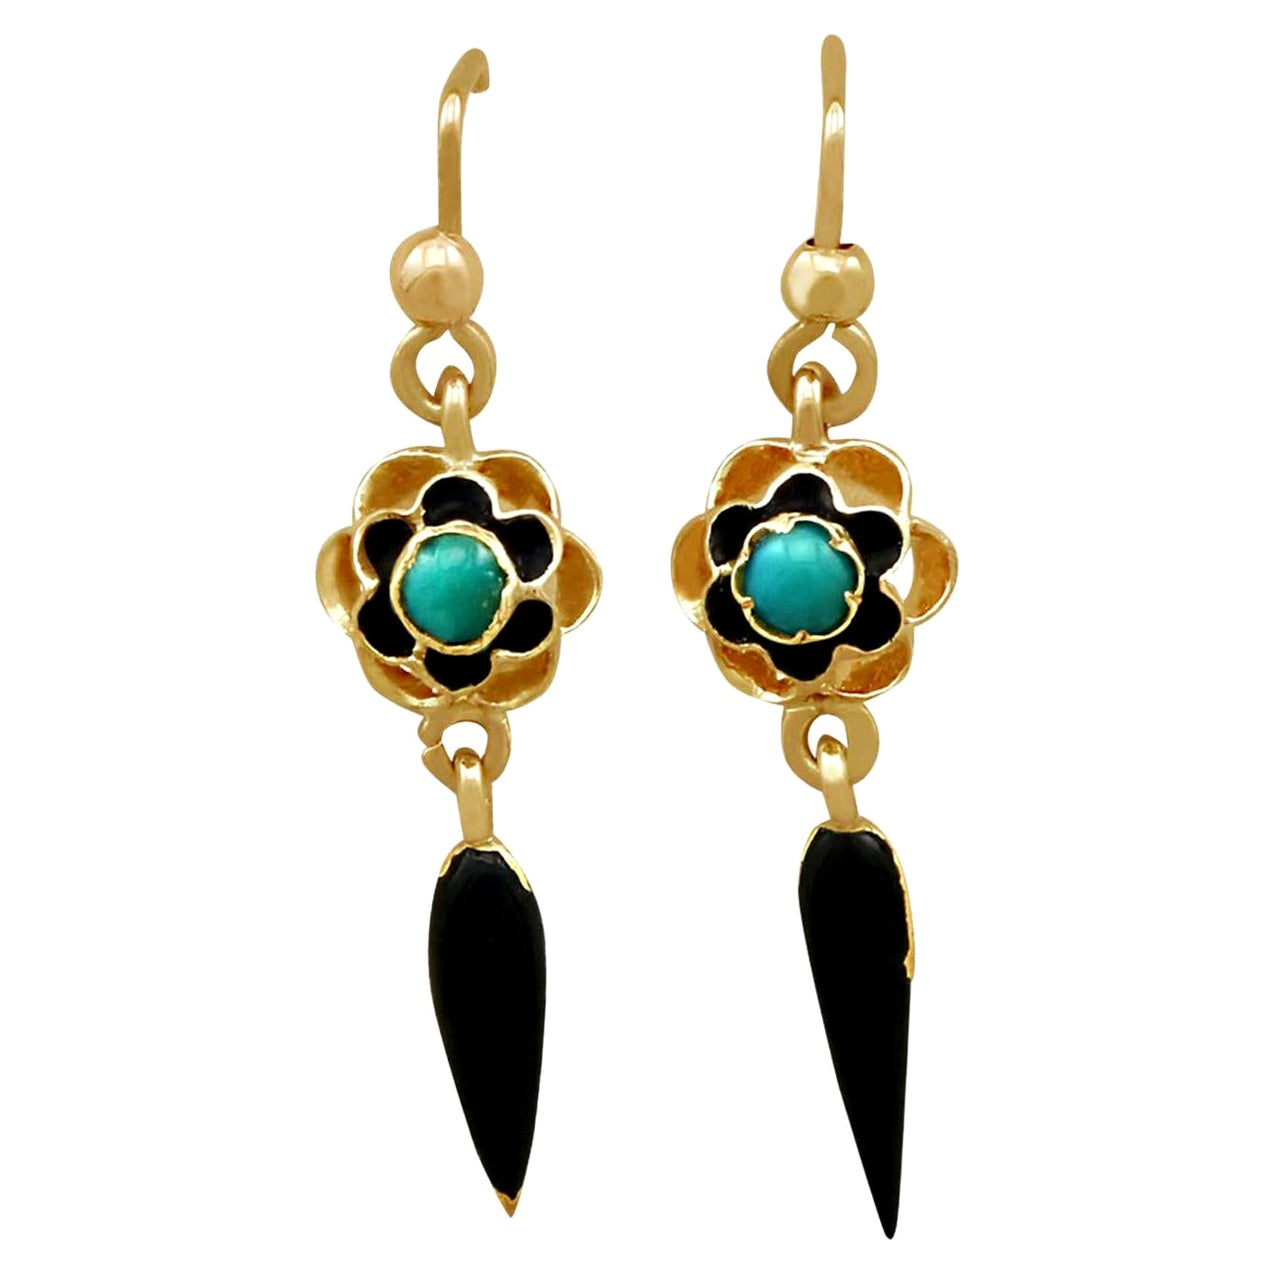 Victorian 1890s Turquoise and Enamel Yellow Gold Earrings